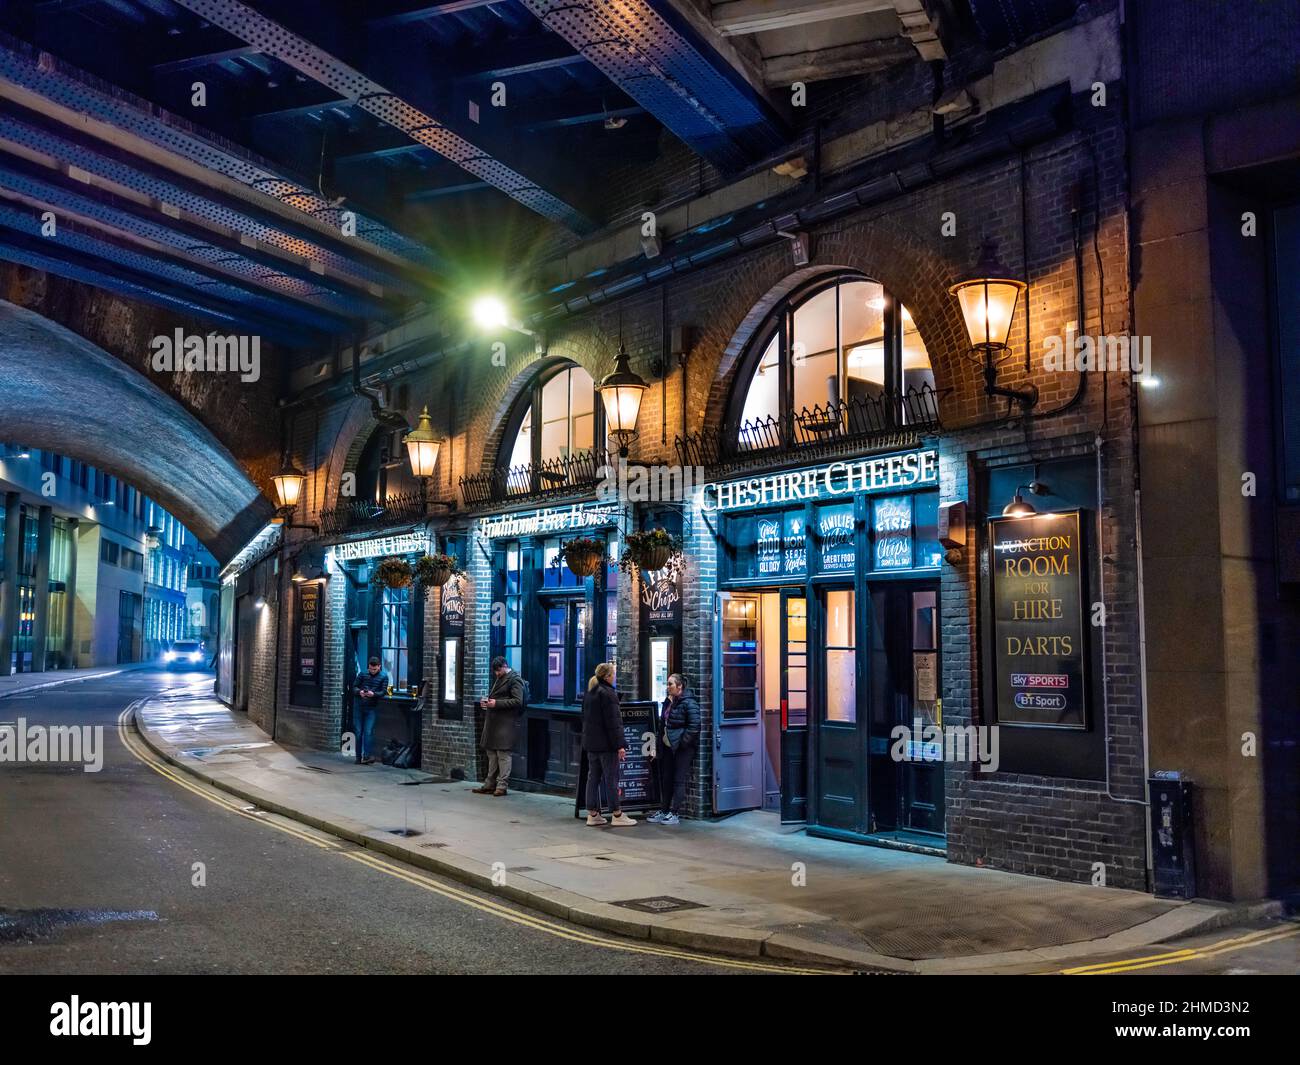 Tradition London pub. Cheshire Cheese, 48 Crutched Friars, Wapping. Under railway bridge, Stock Photo